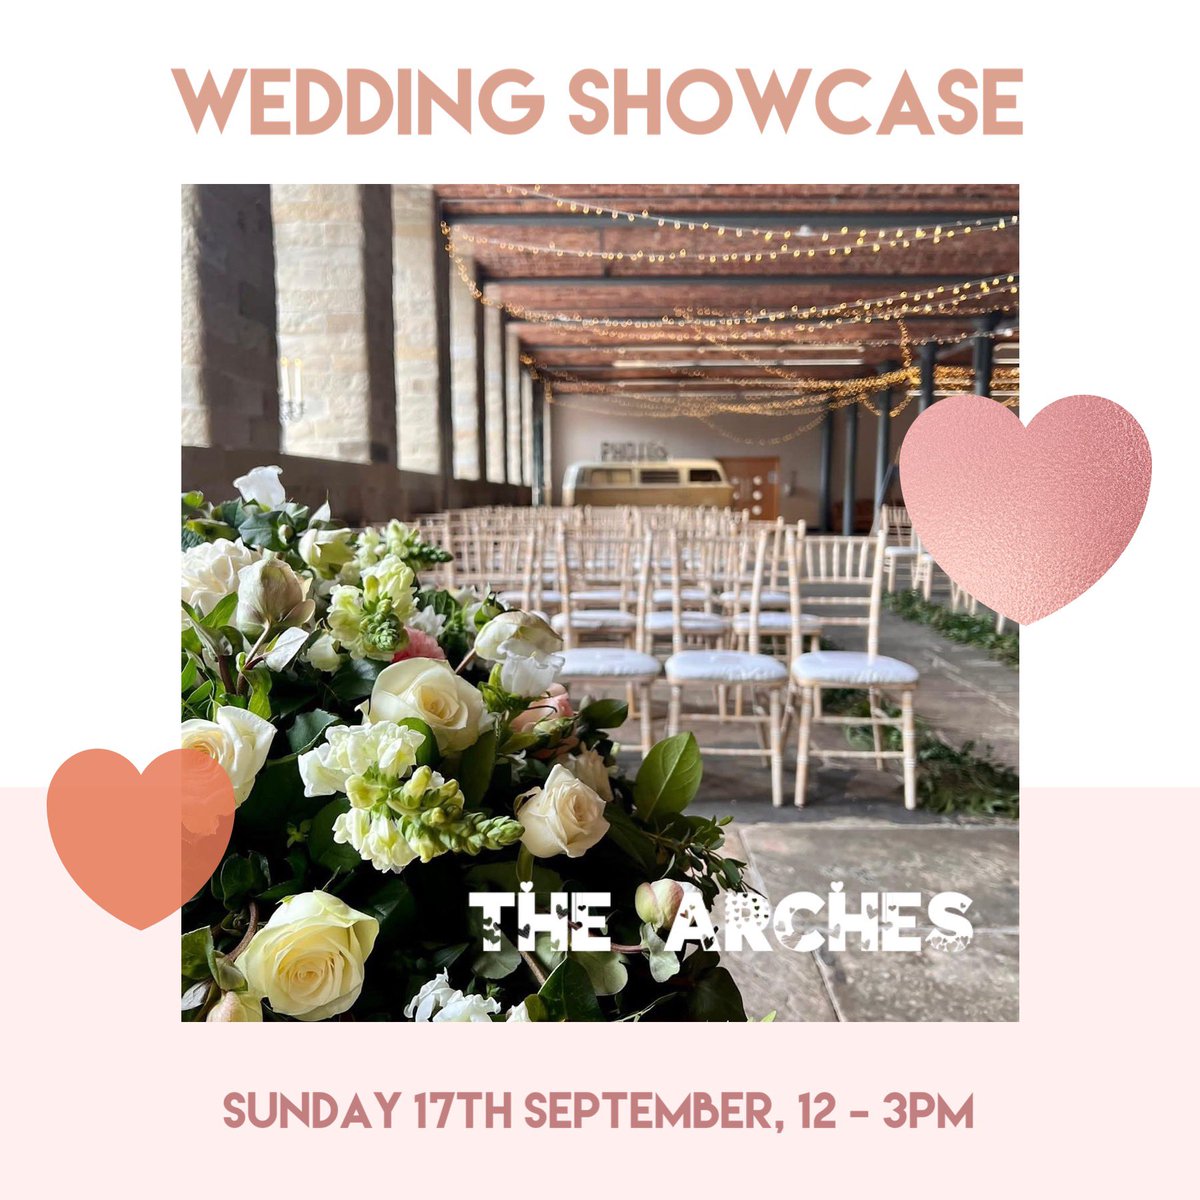 👰‍♂️ Looking for the perfect #Wedding Package? Need inspiration for your Big Day? #weddingvenue #weddingfair #halifax #yorkshire 💕 This time next week we’ll be welcoming lots of couples to our Wedding Showcase. No need to book, pop in between 12-3pm, next Sunday 17th September.